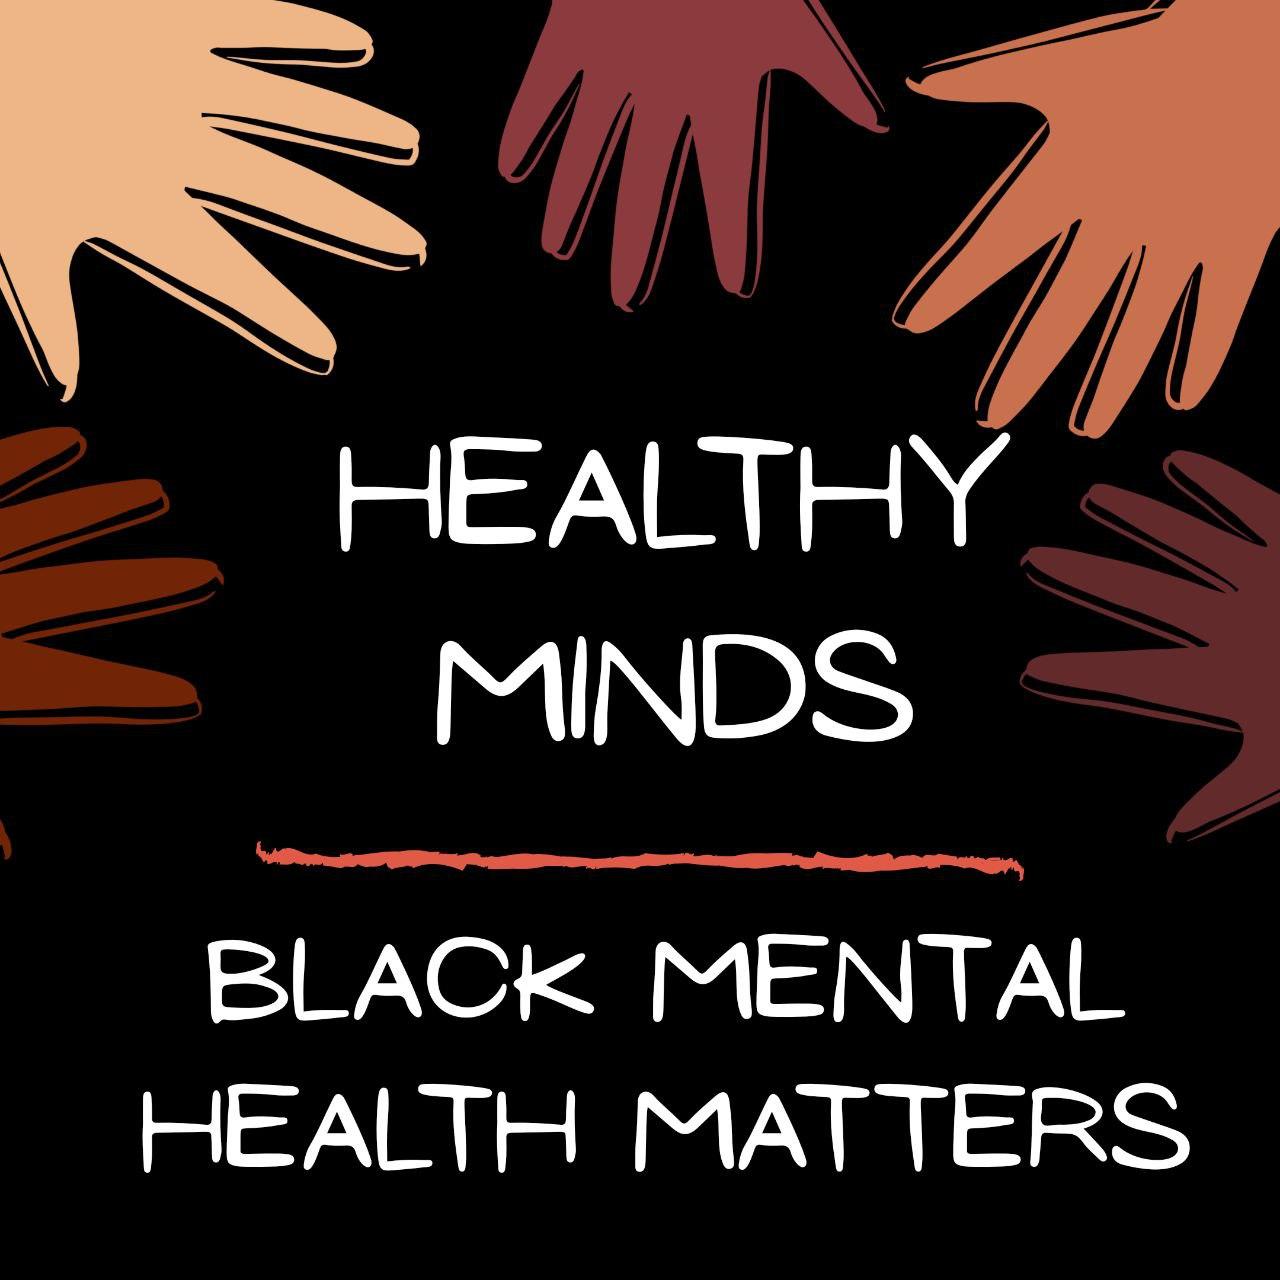 Black Mental Health Matters So Get Out and Vote!